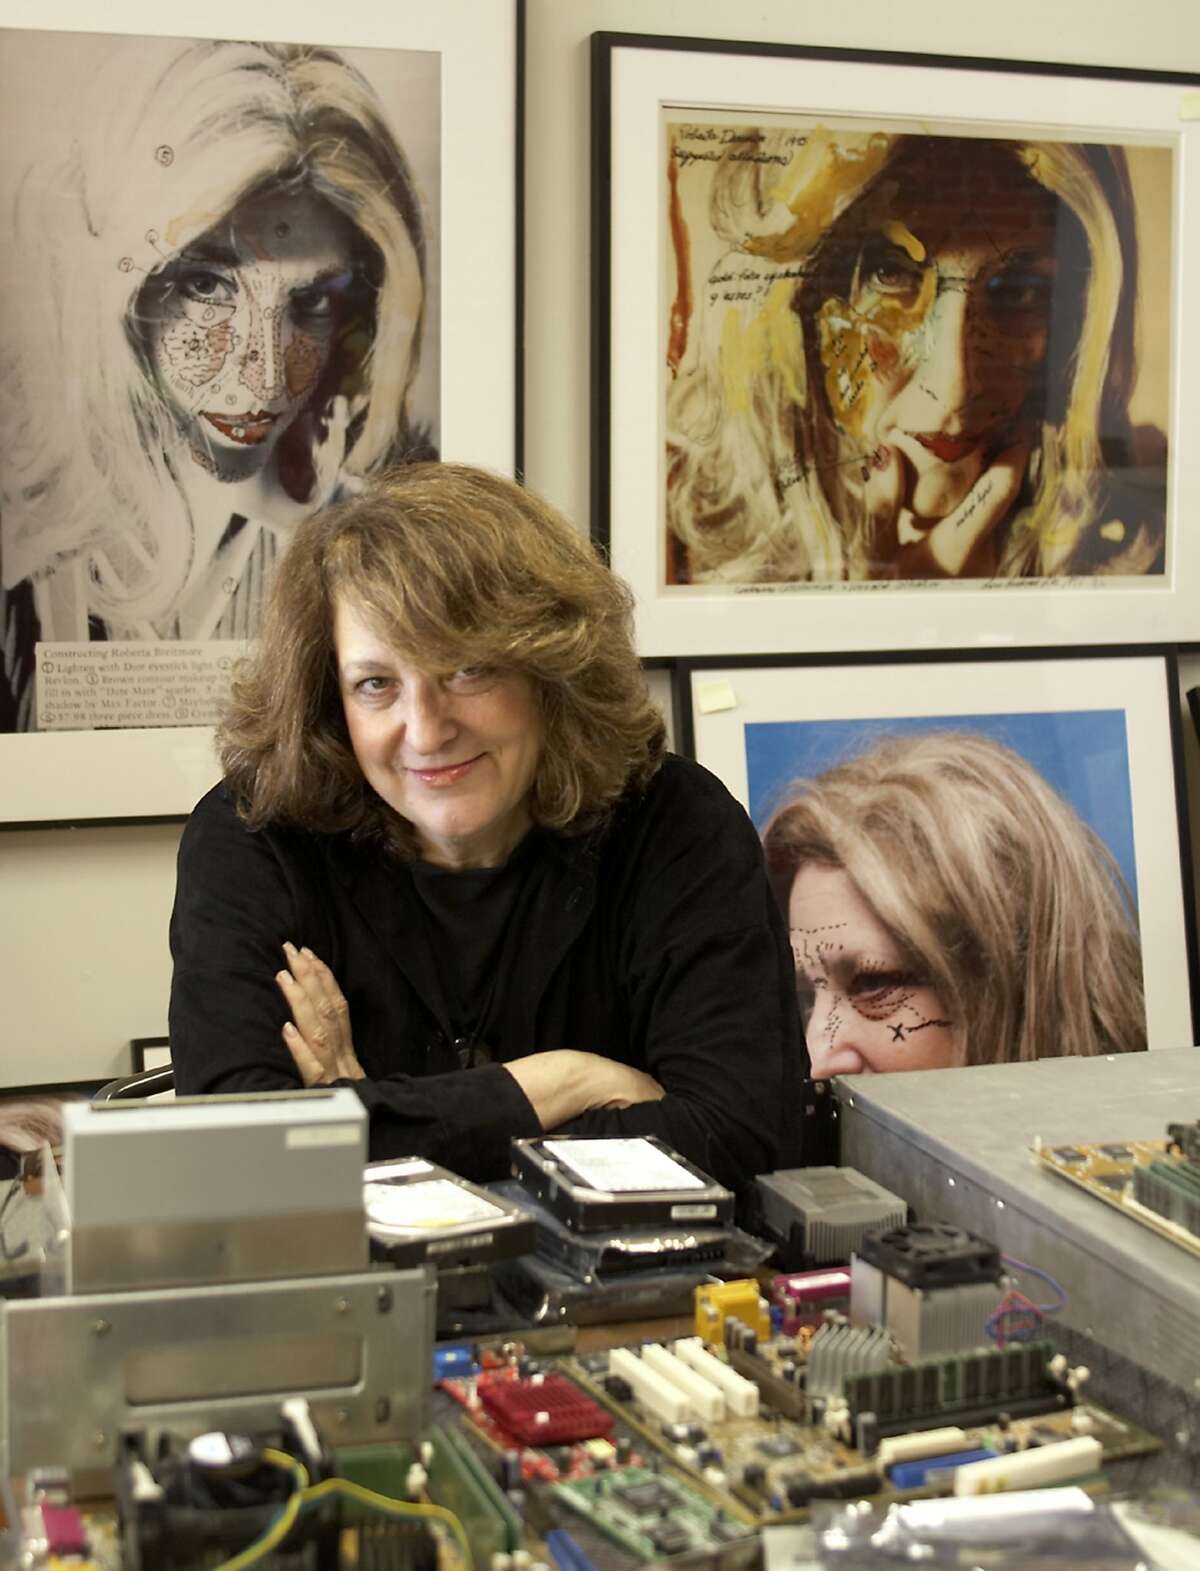 Lynn Hershman Leeson with some of her work